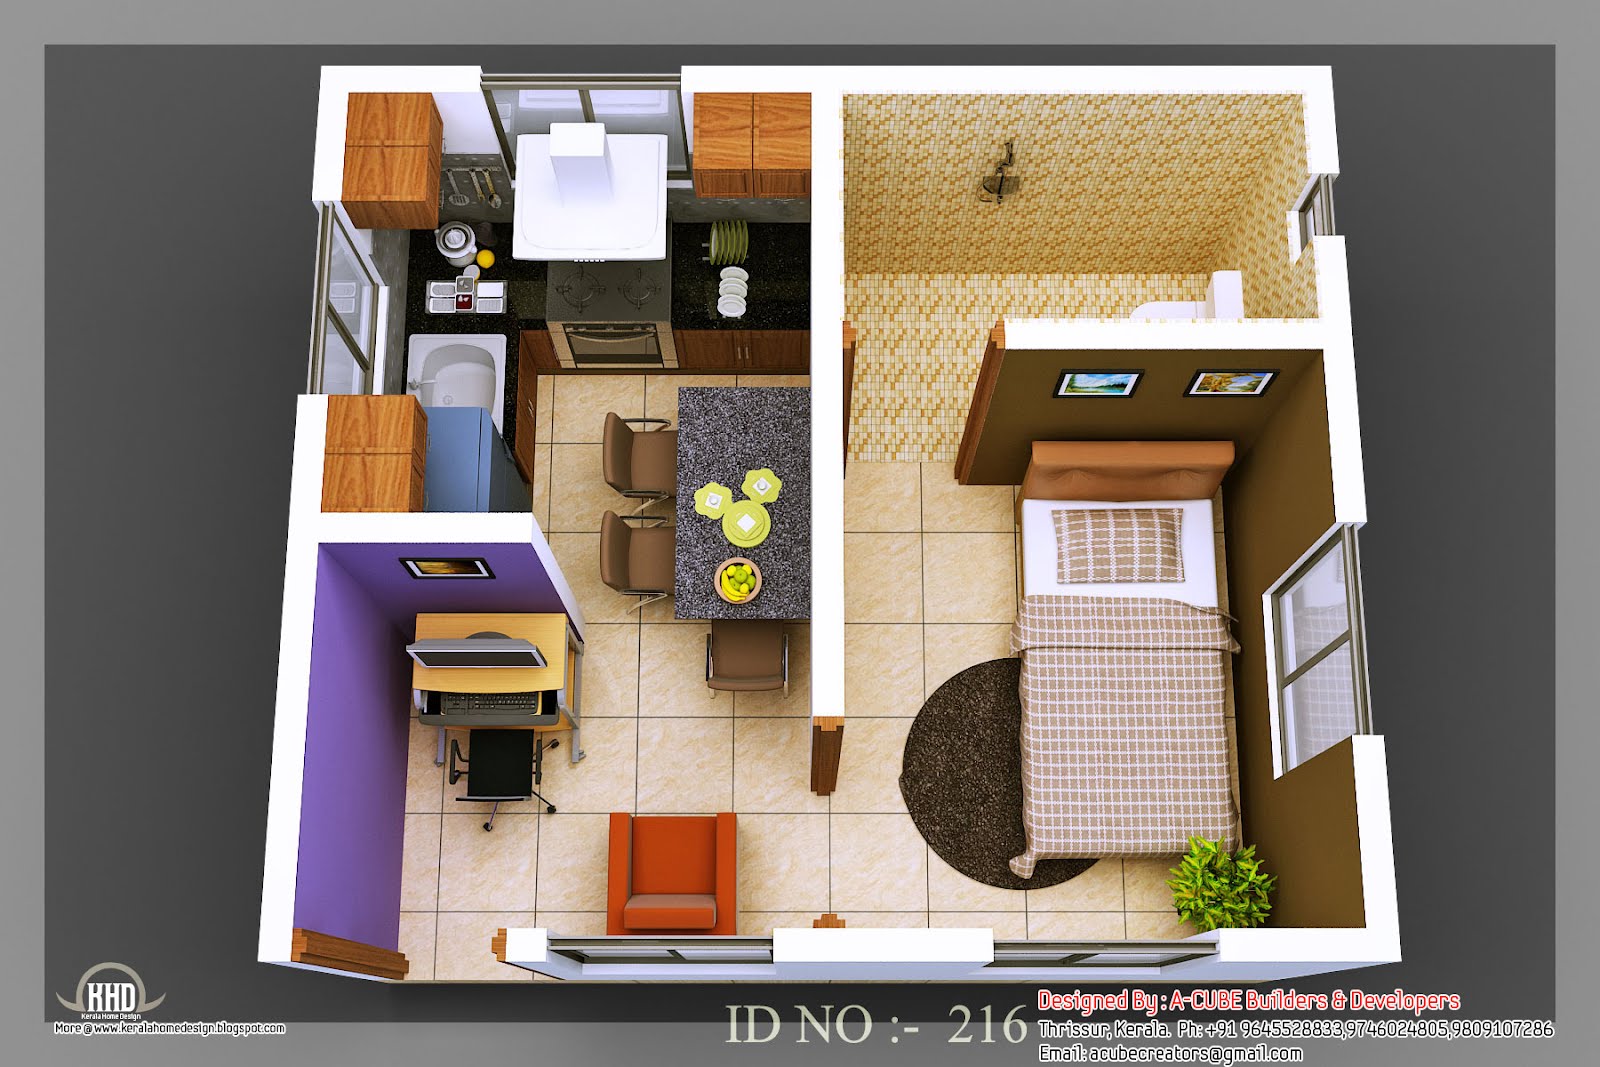  3D  isometric views  of small house  plans  Kerala Home  Decor